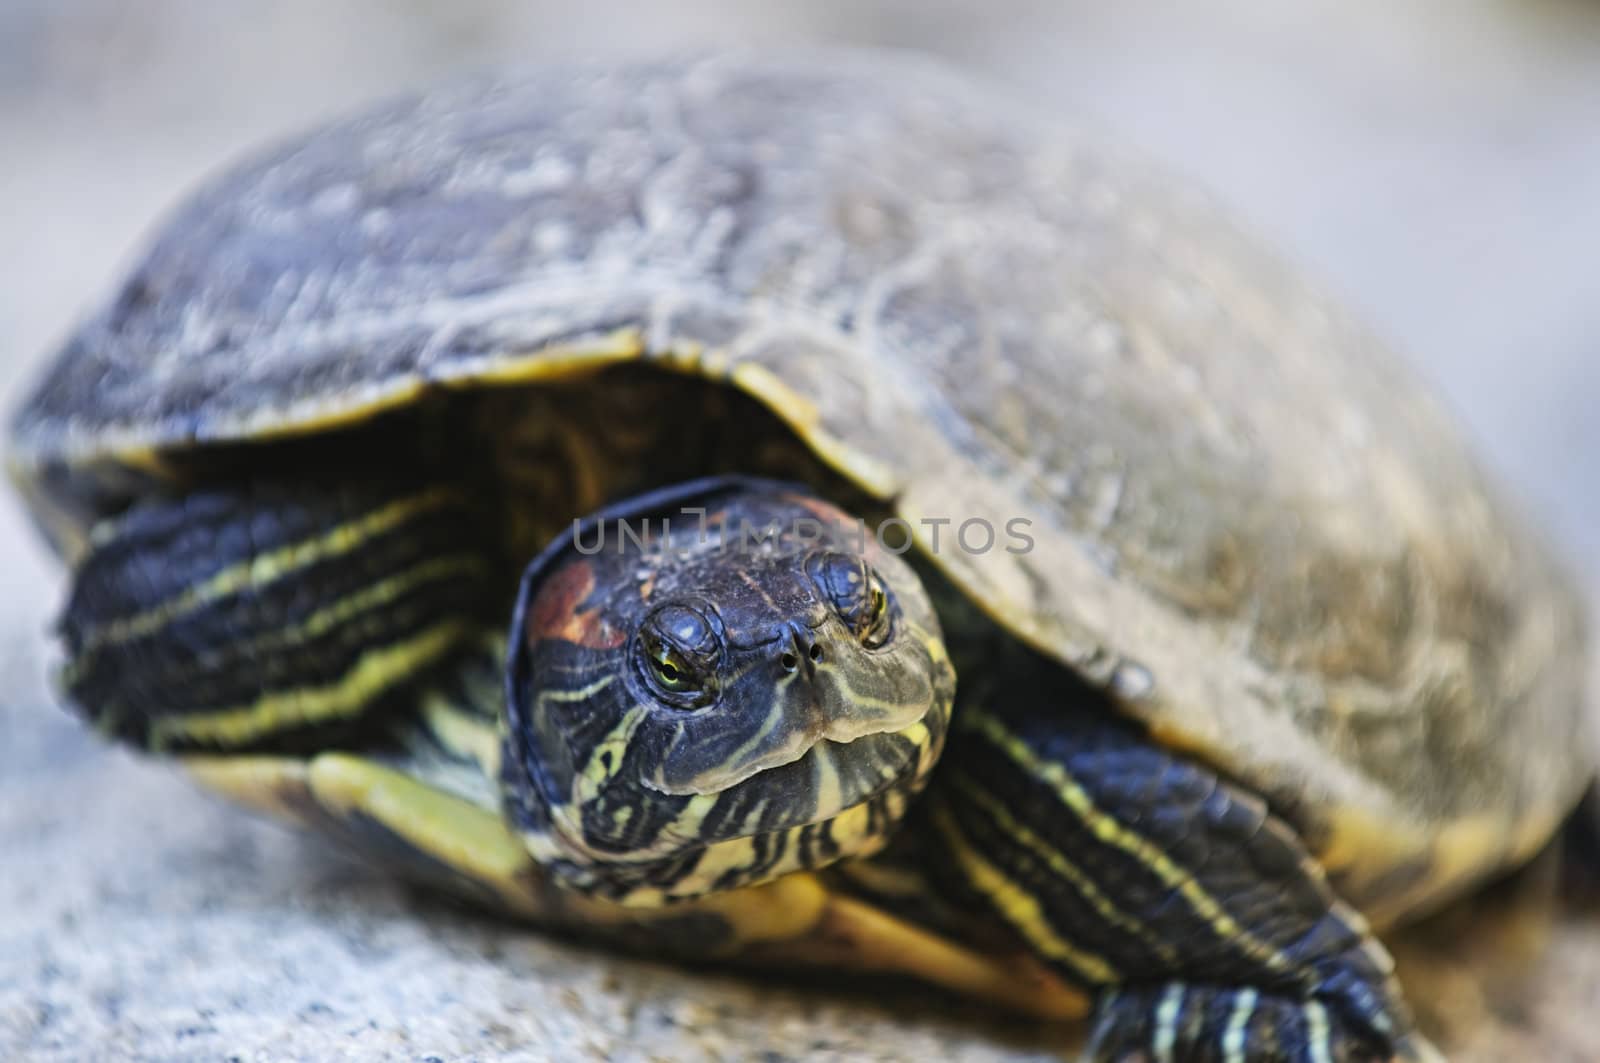 Red eared slider turtle by elenathewise